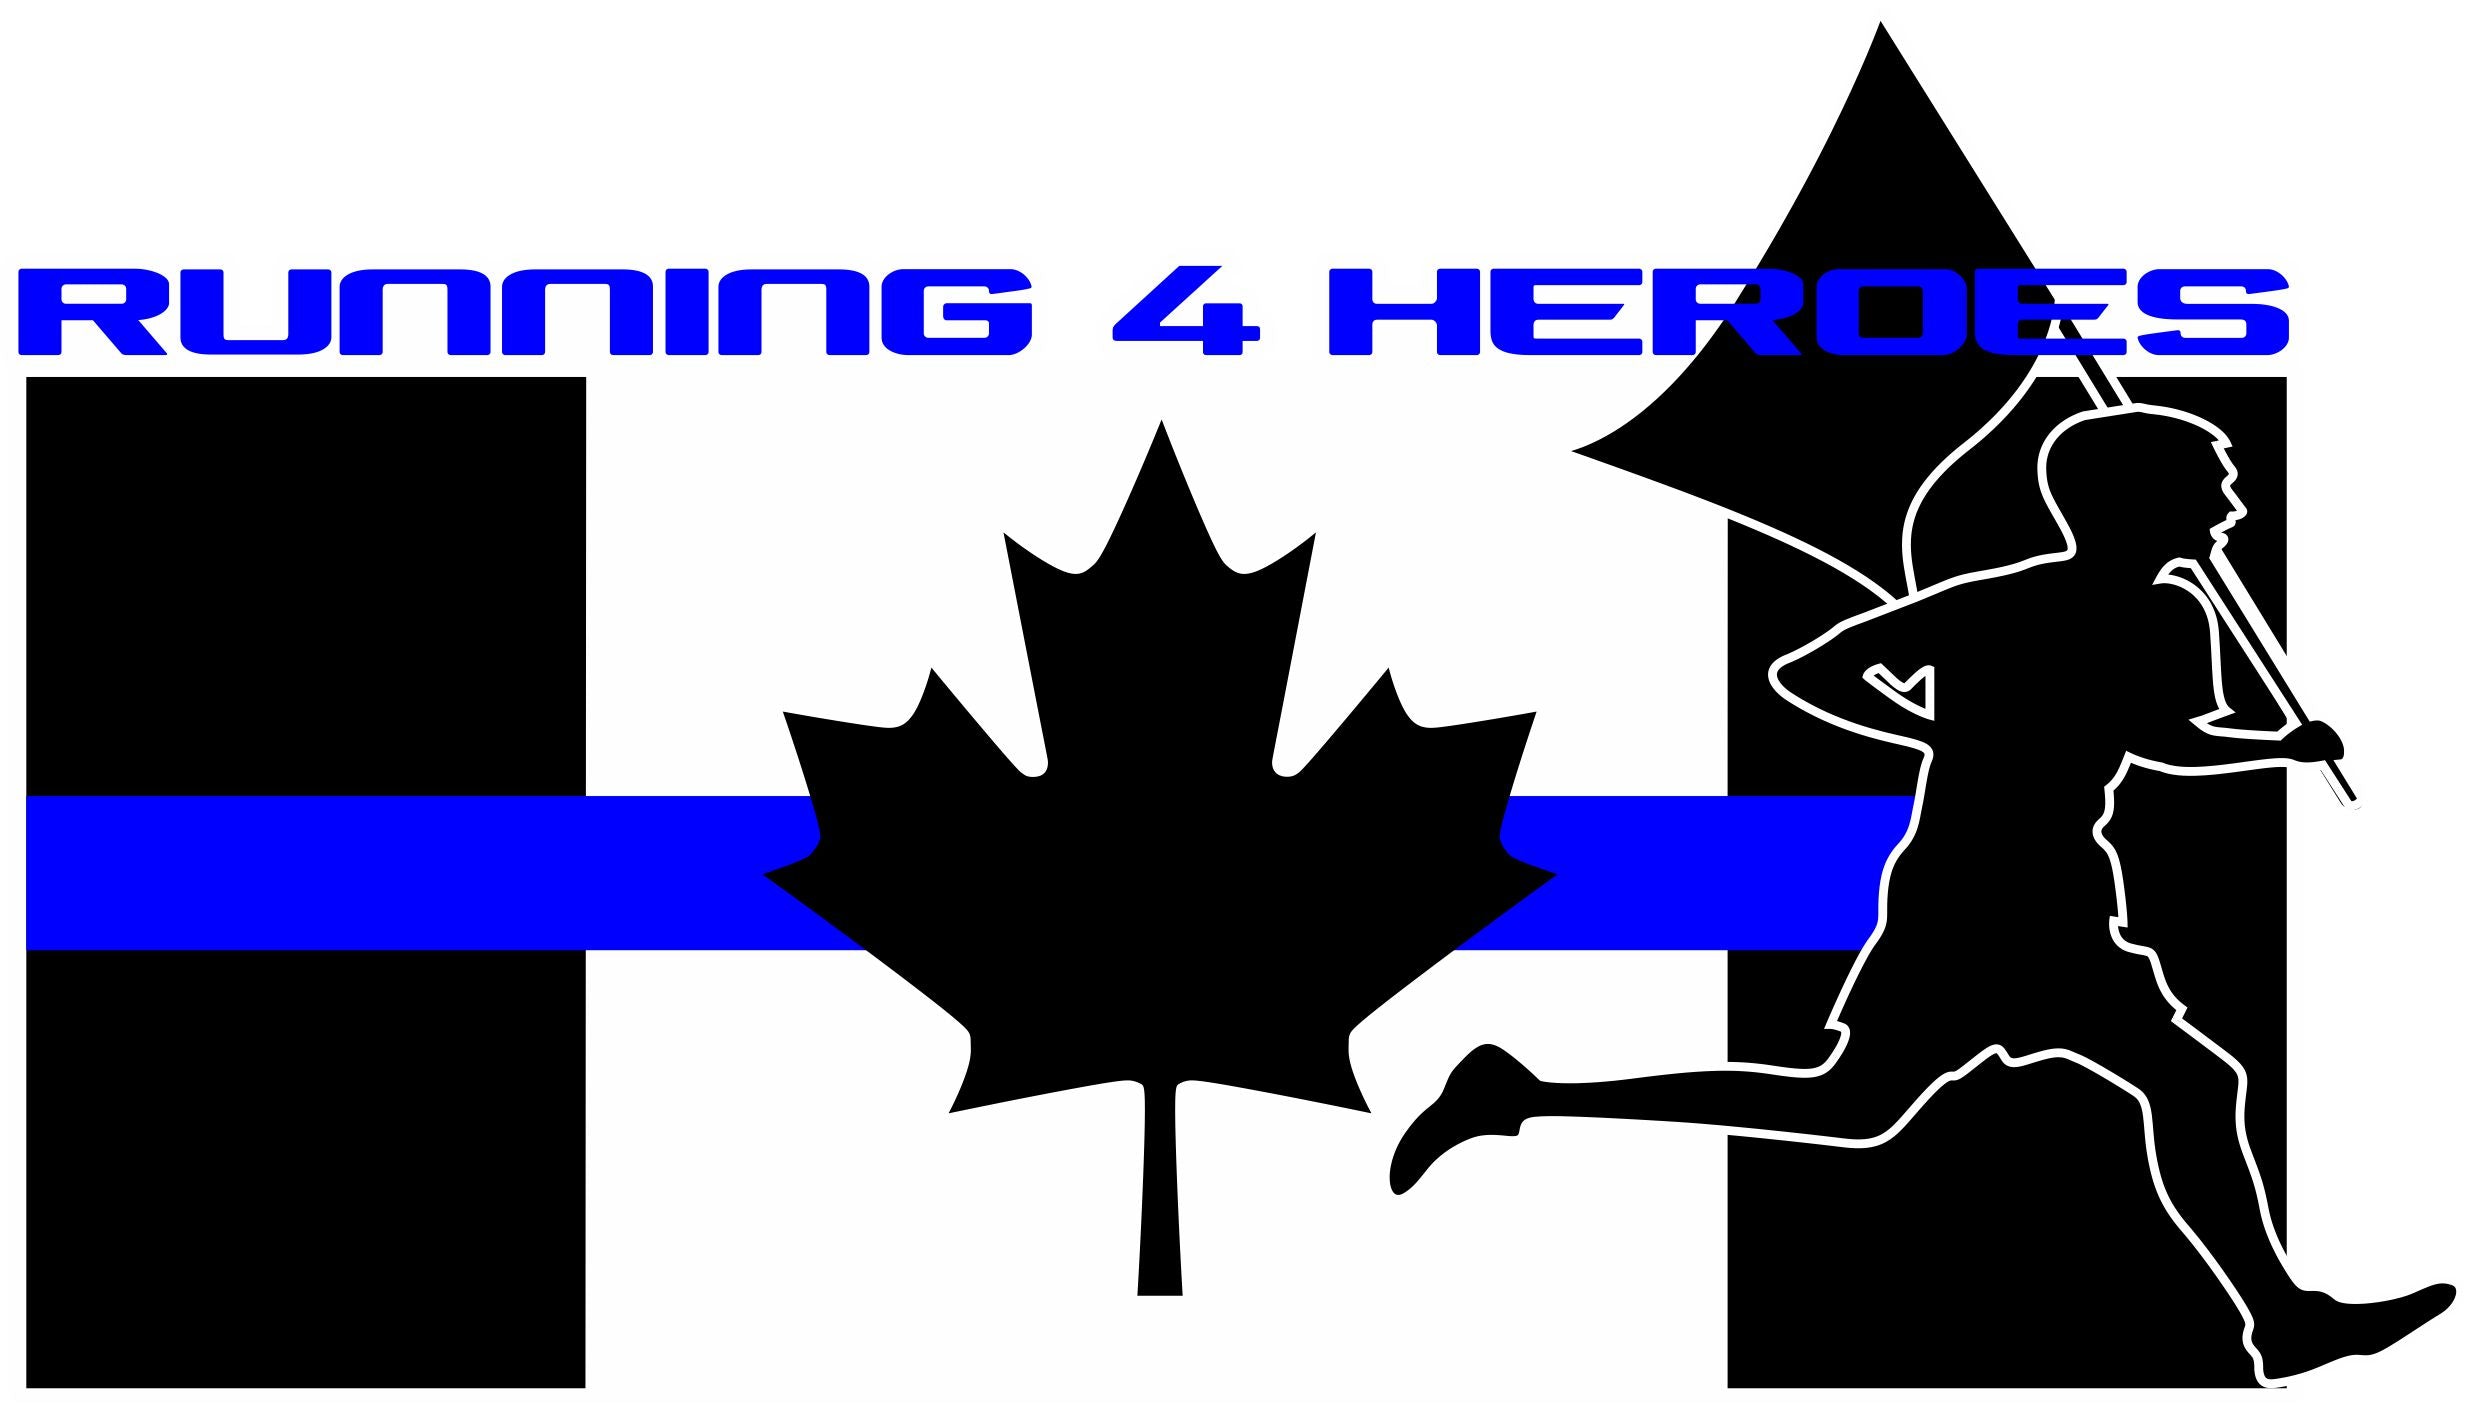 Running for Heroes Customer Decal - Powercall Sirens LLC